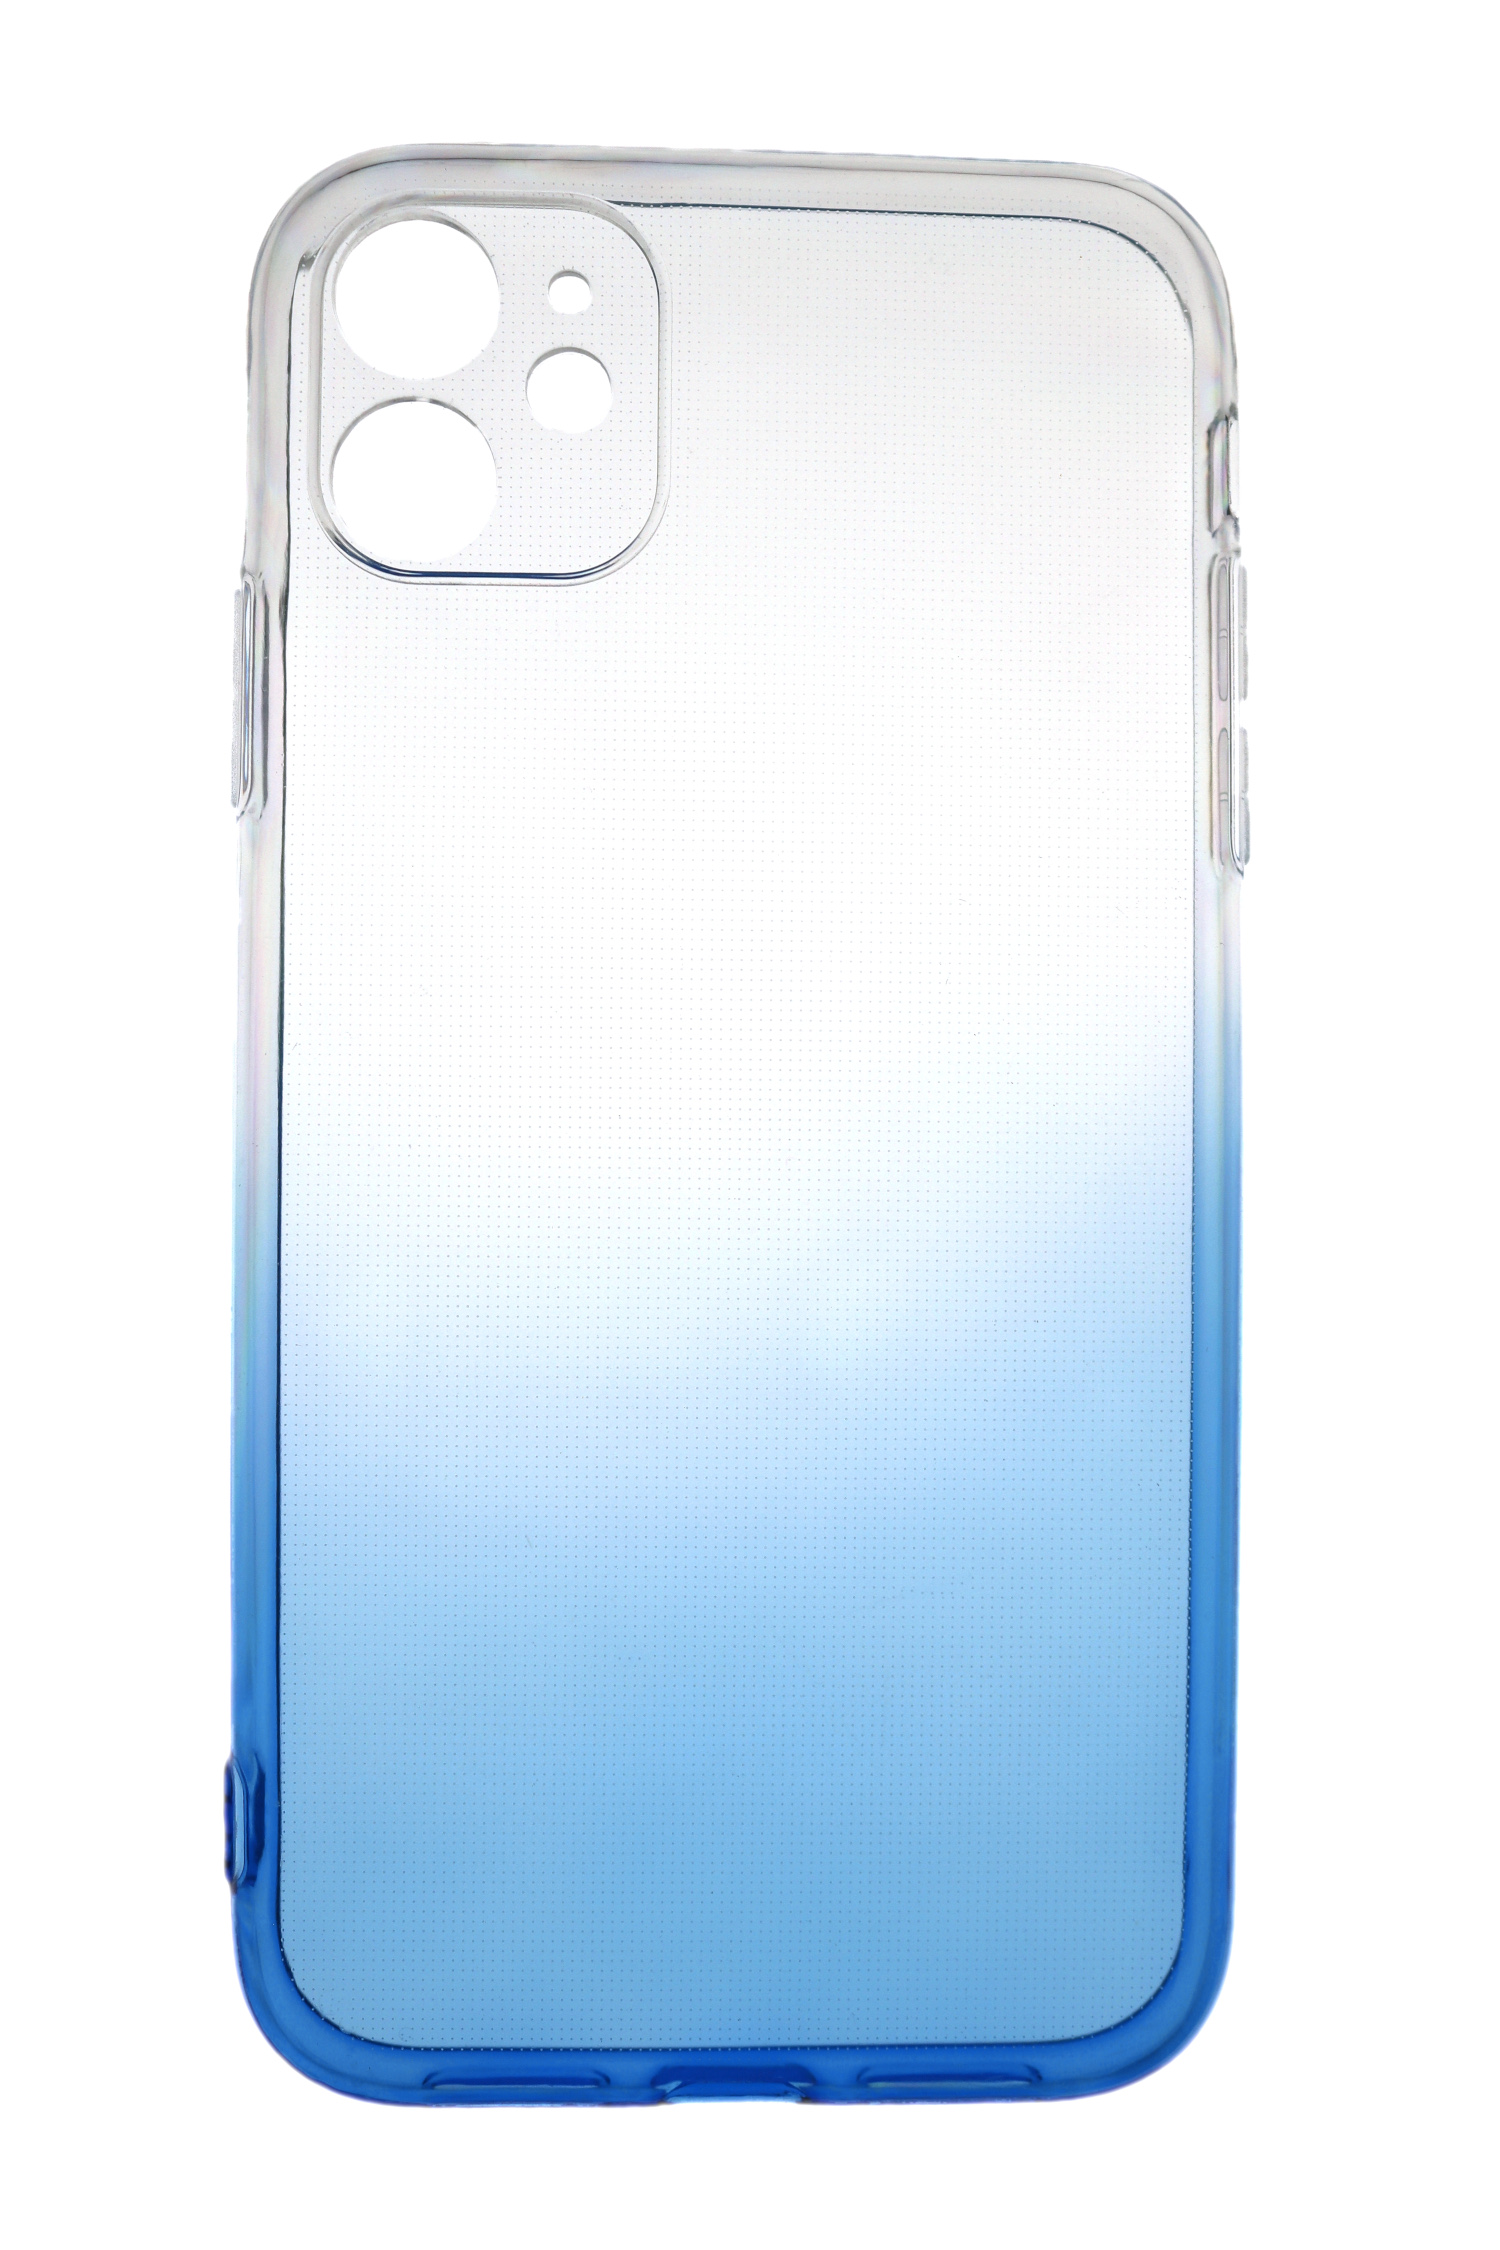 TPU Backcover, Strong, JAMCOVER Case 12, iPhone 12 Pro, iPhone mm 2.0 Transparent Apple, Blau,